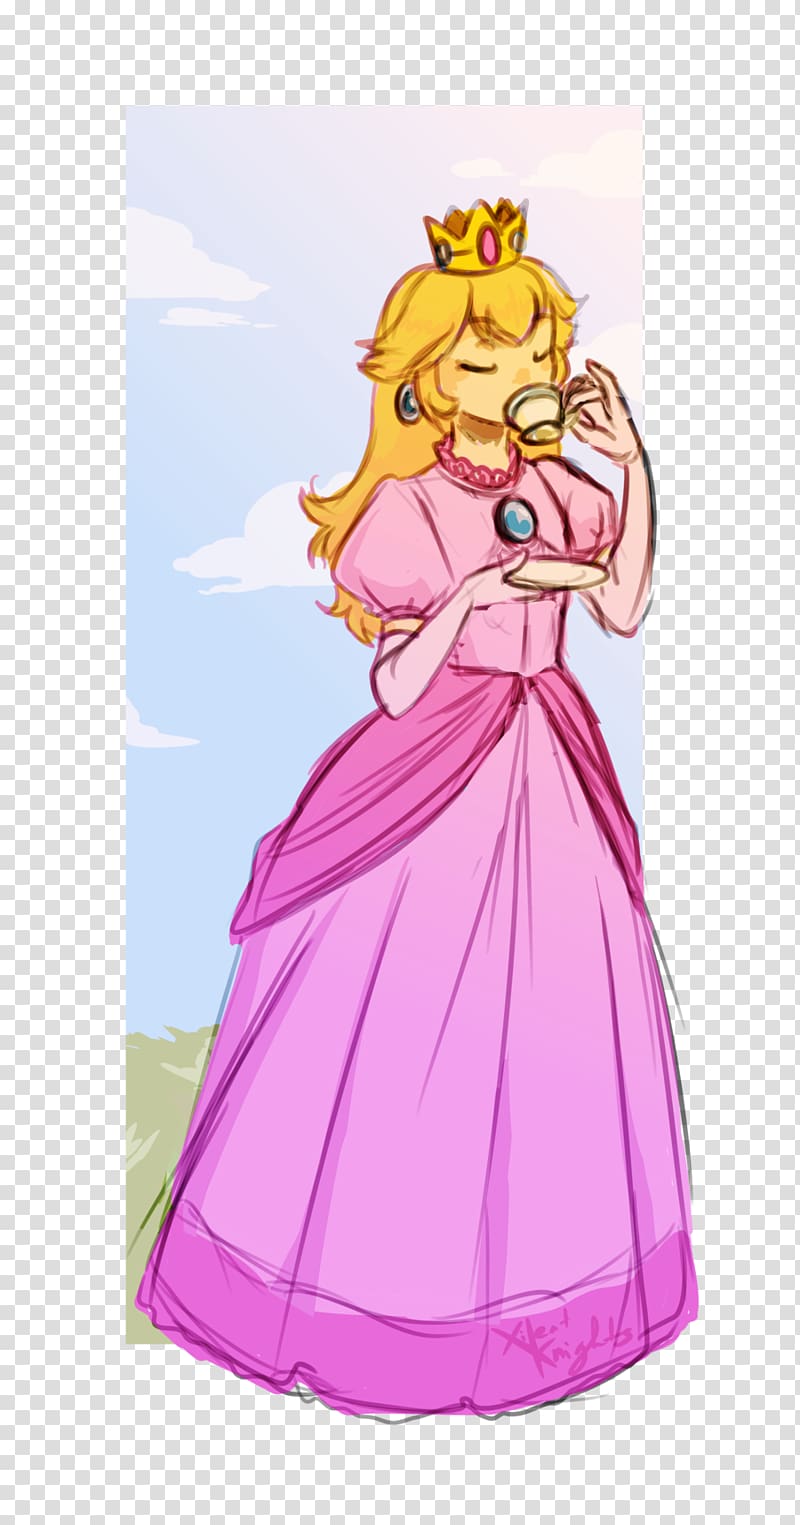 Fairy Gown Cartoon Pink M, princess and knight transparent background PNG clipart